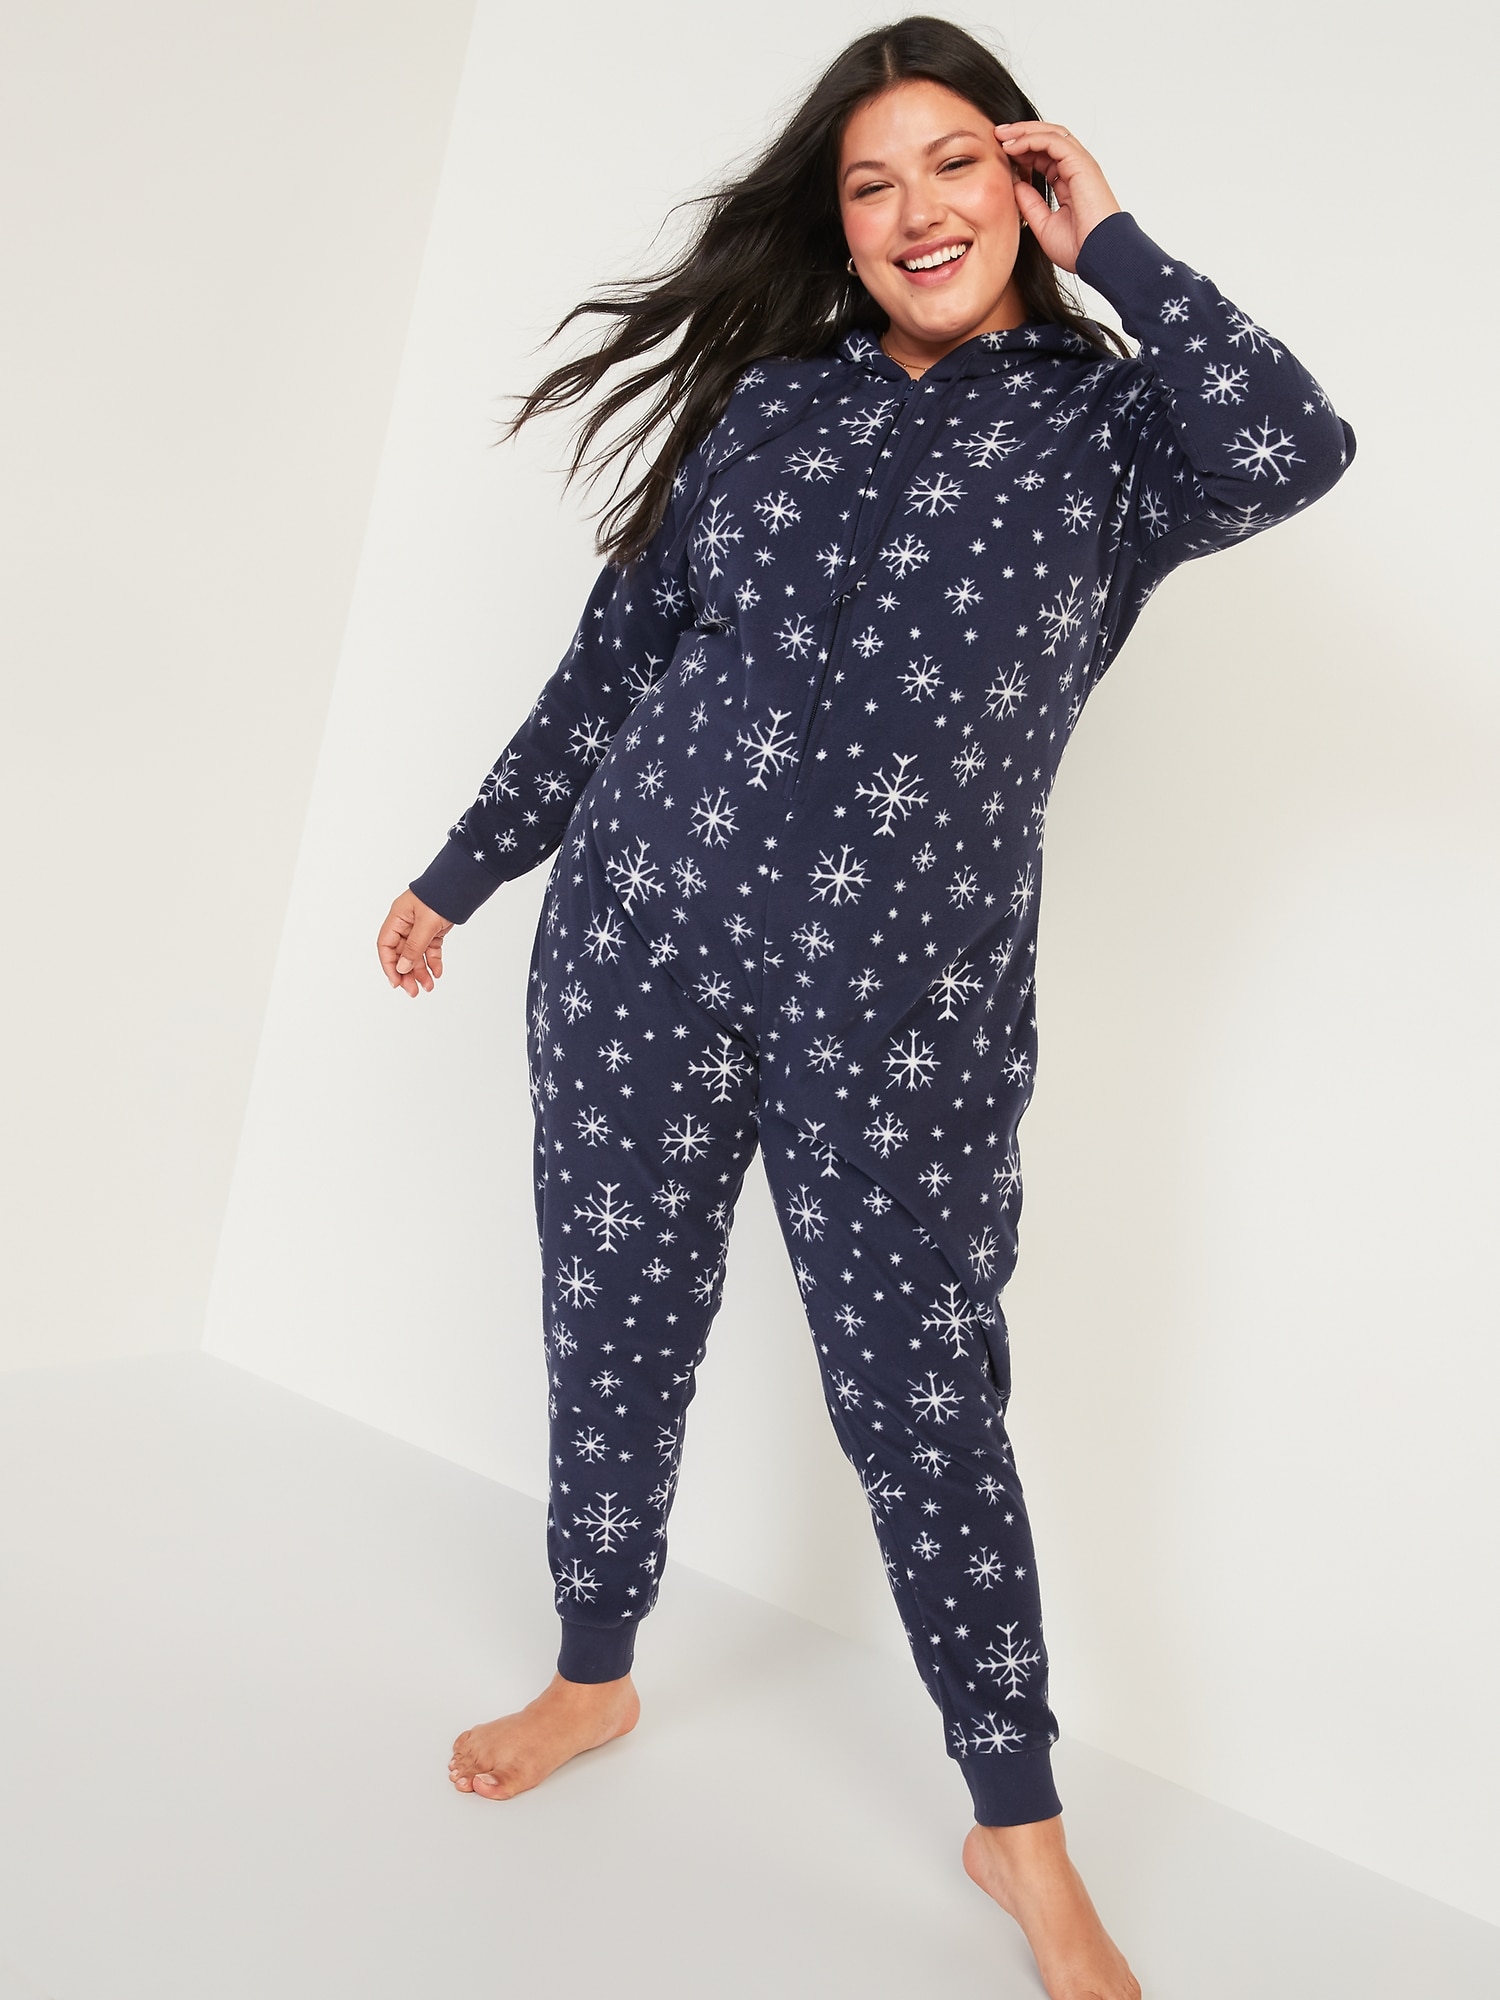 Patterned Micro Performance Fleece Hooded Plus-Size One-Piece Pajamas ...